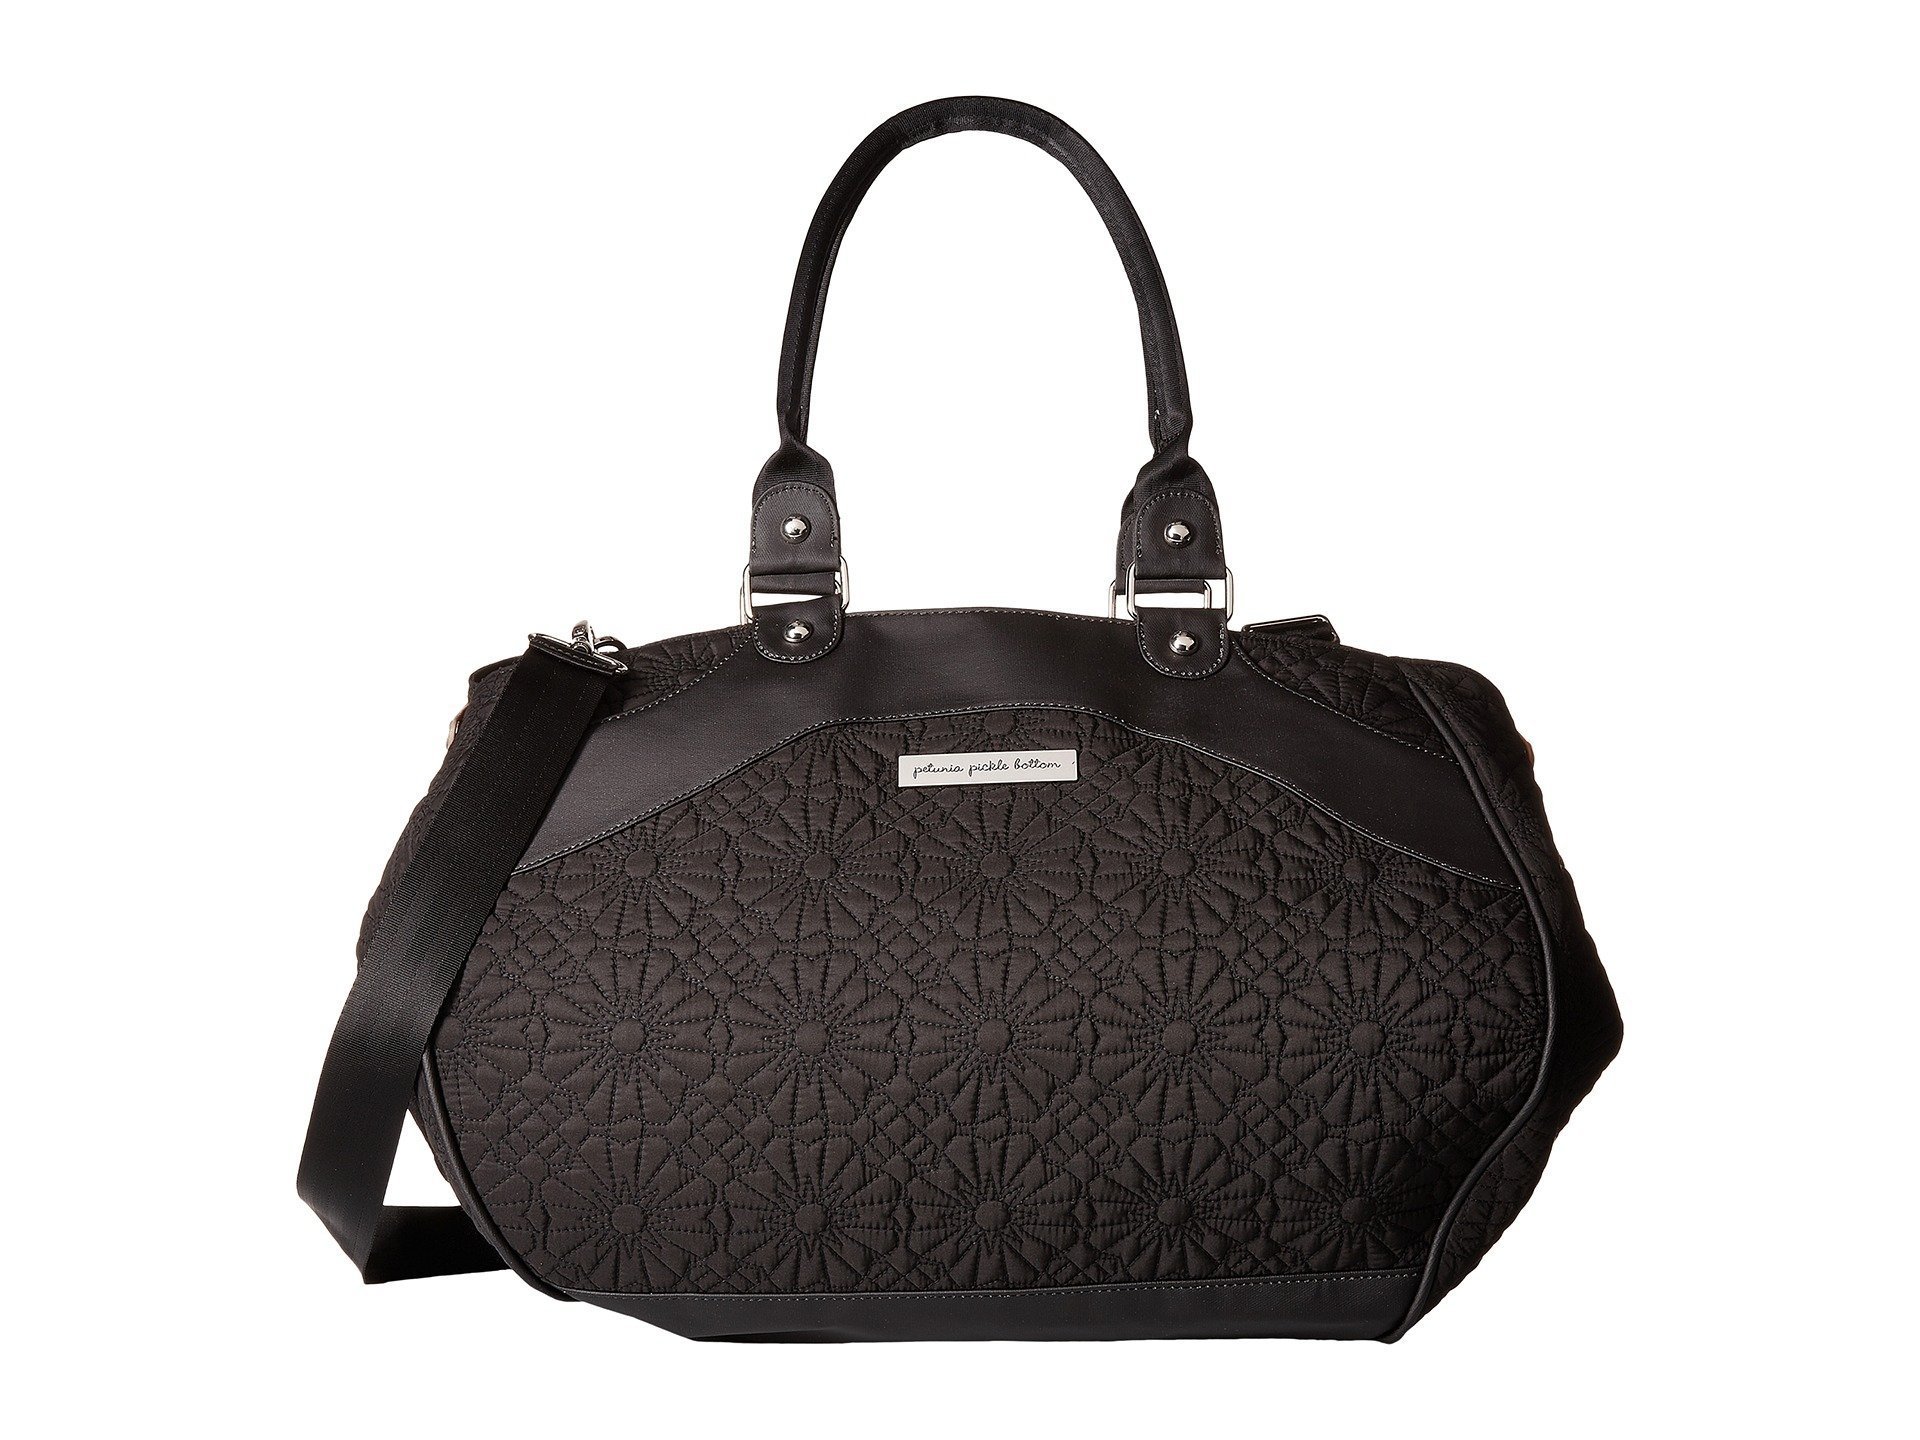 19 Fashionable Diaper Bags That Look 